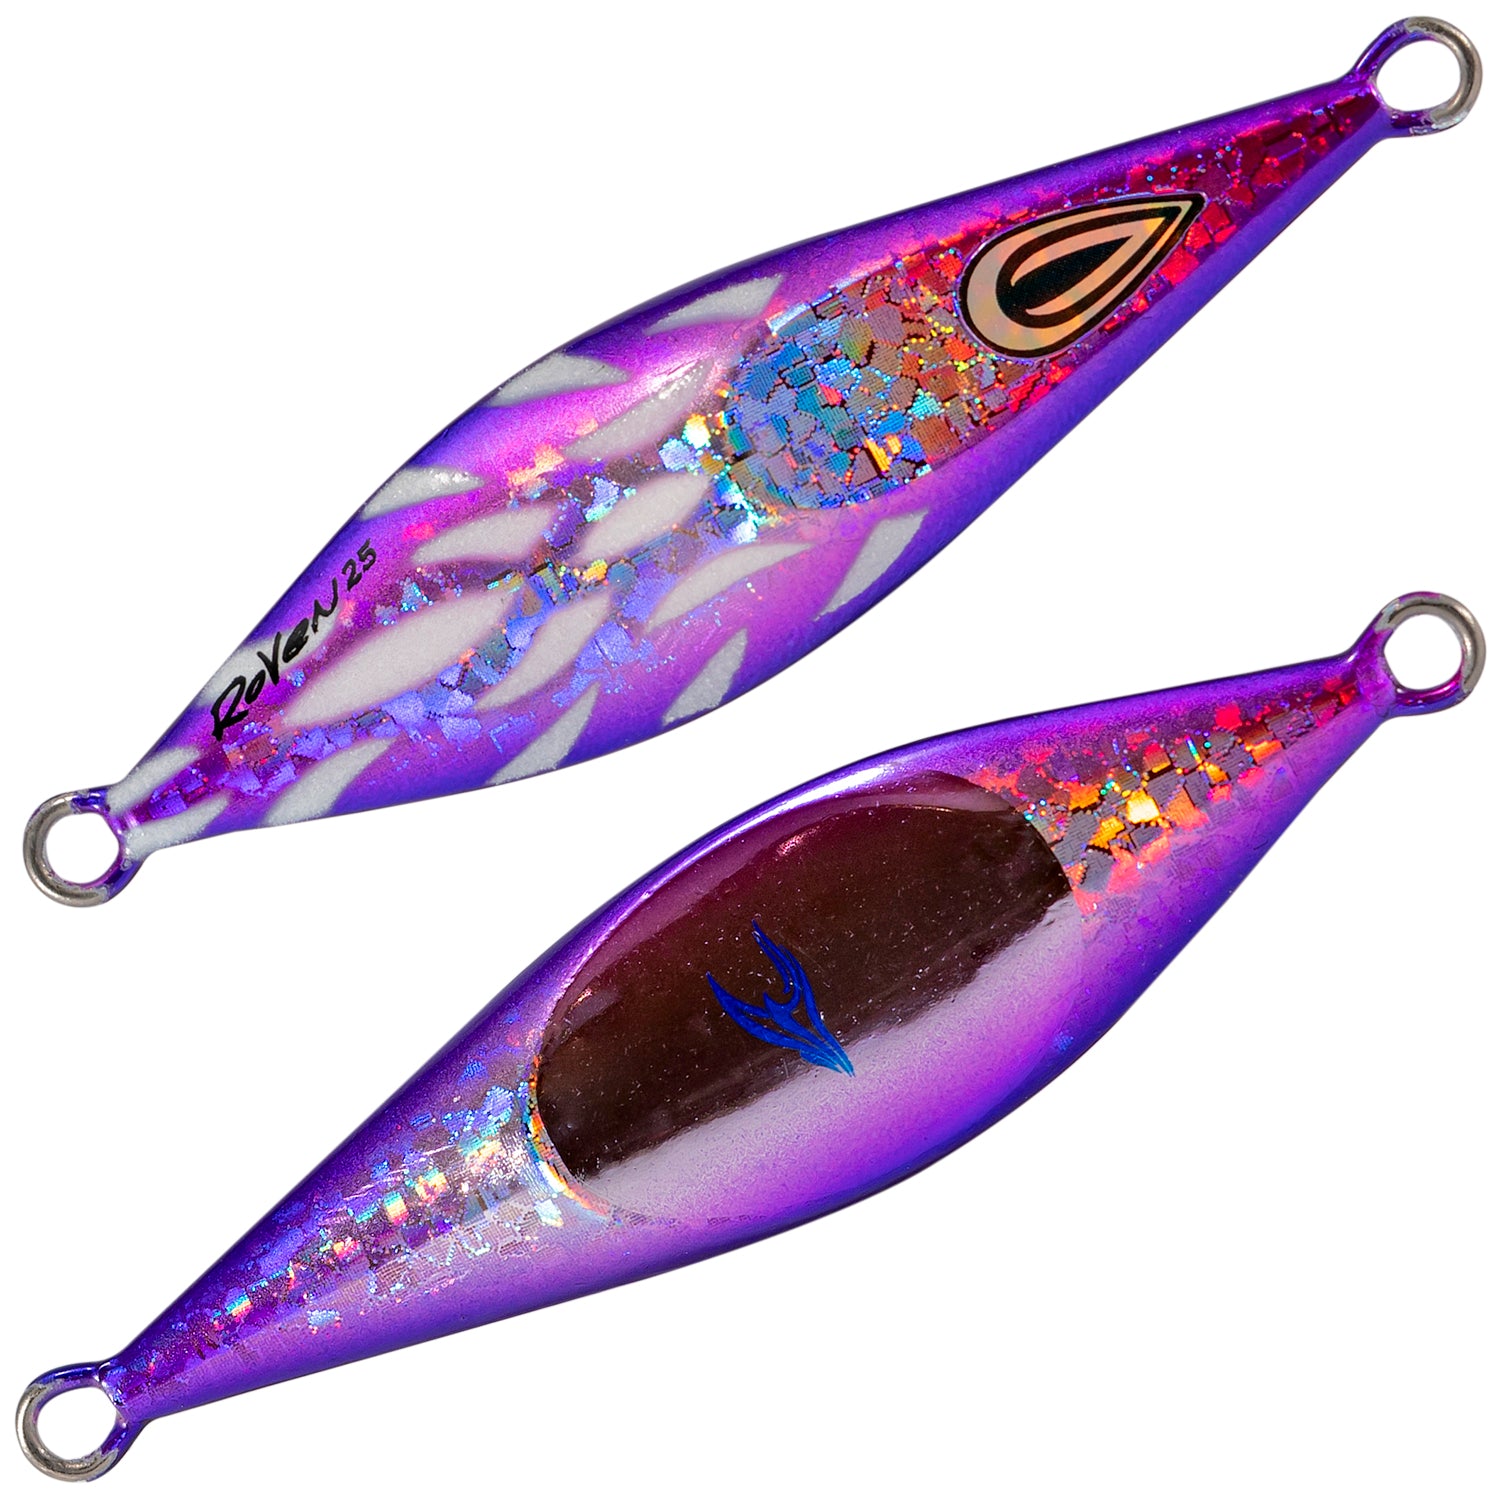 Oceans Legacy Roven Jig Rigged 15g 5